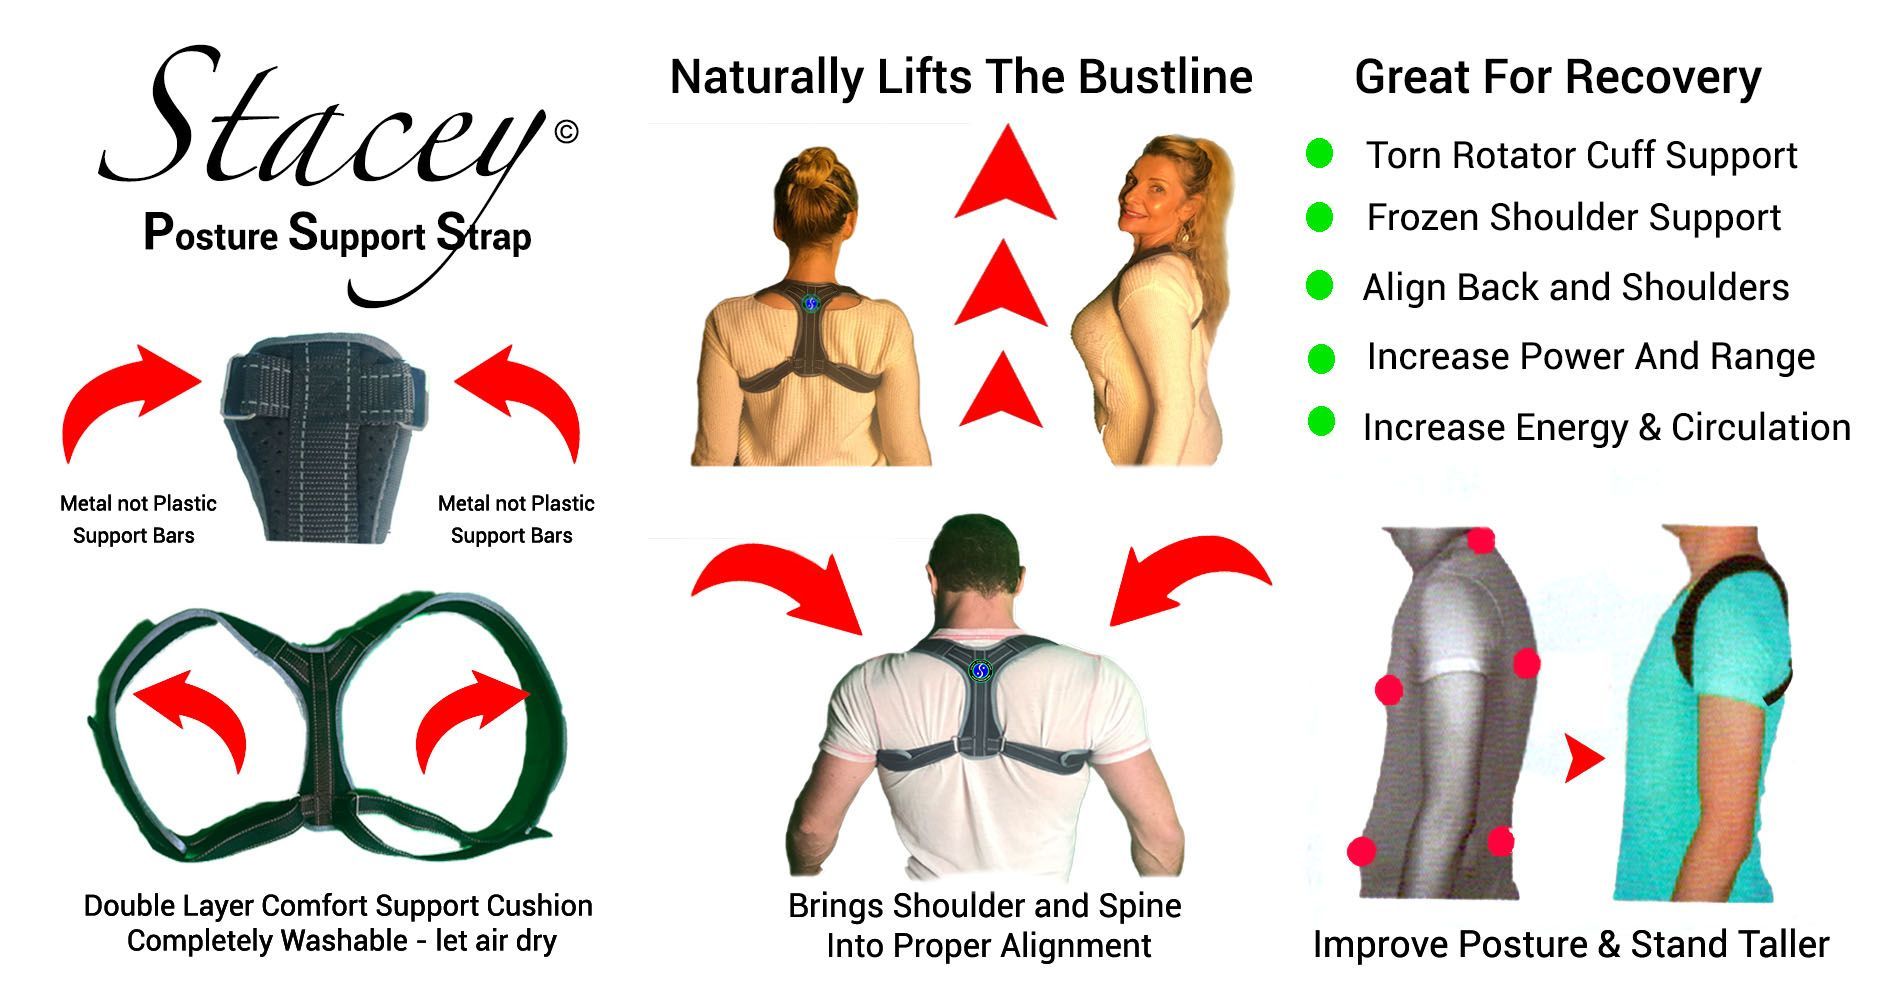 Stacey posture strap immediately improves posture